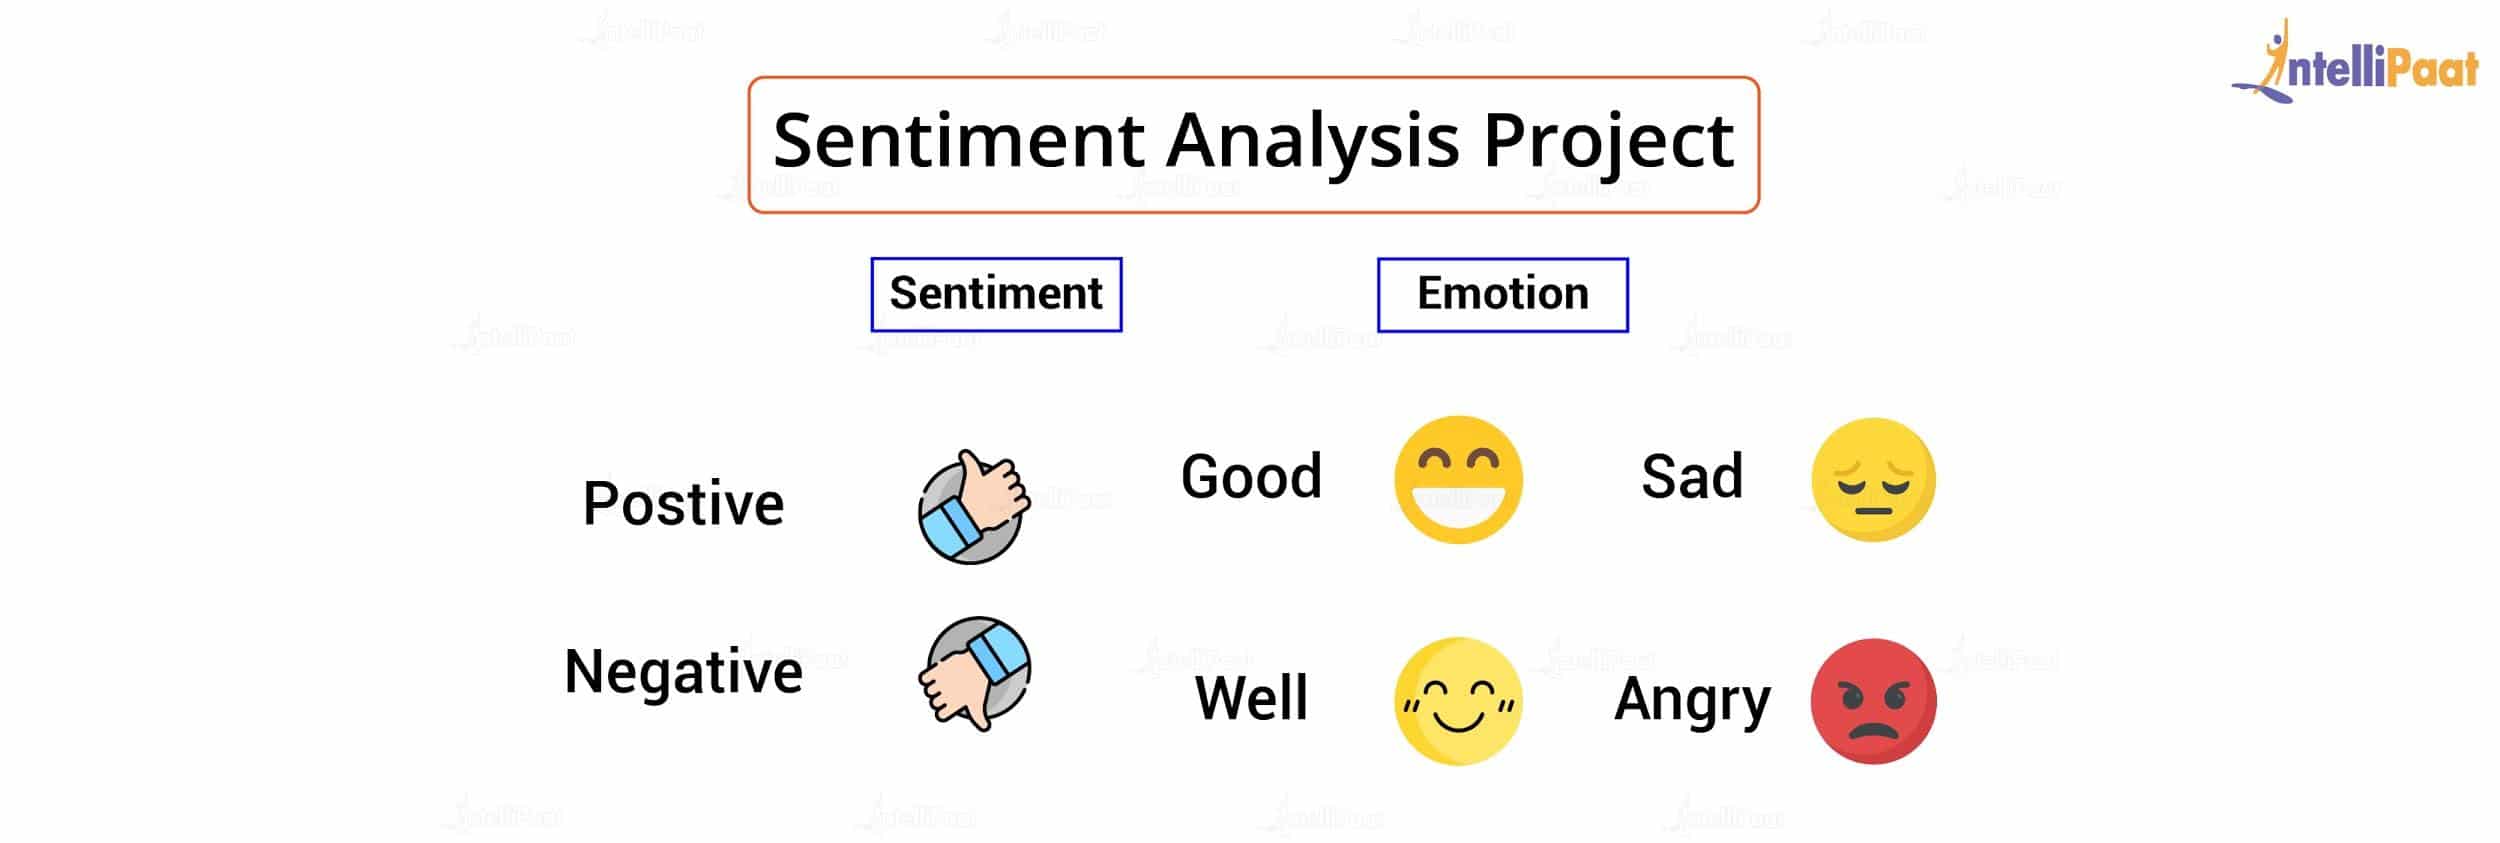 Sentiment Analysis Project